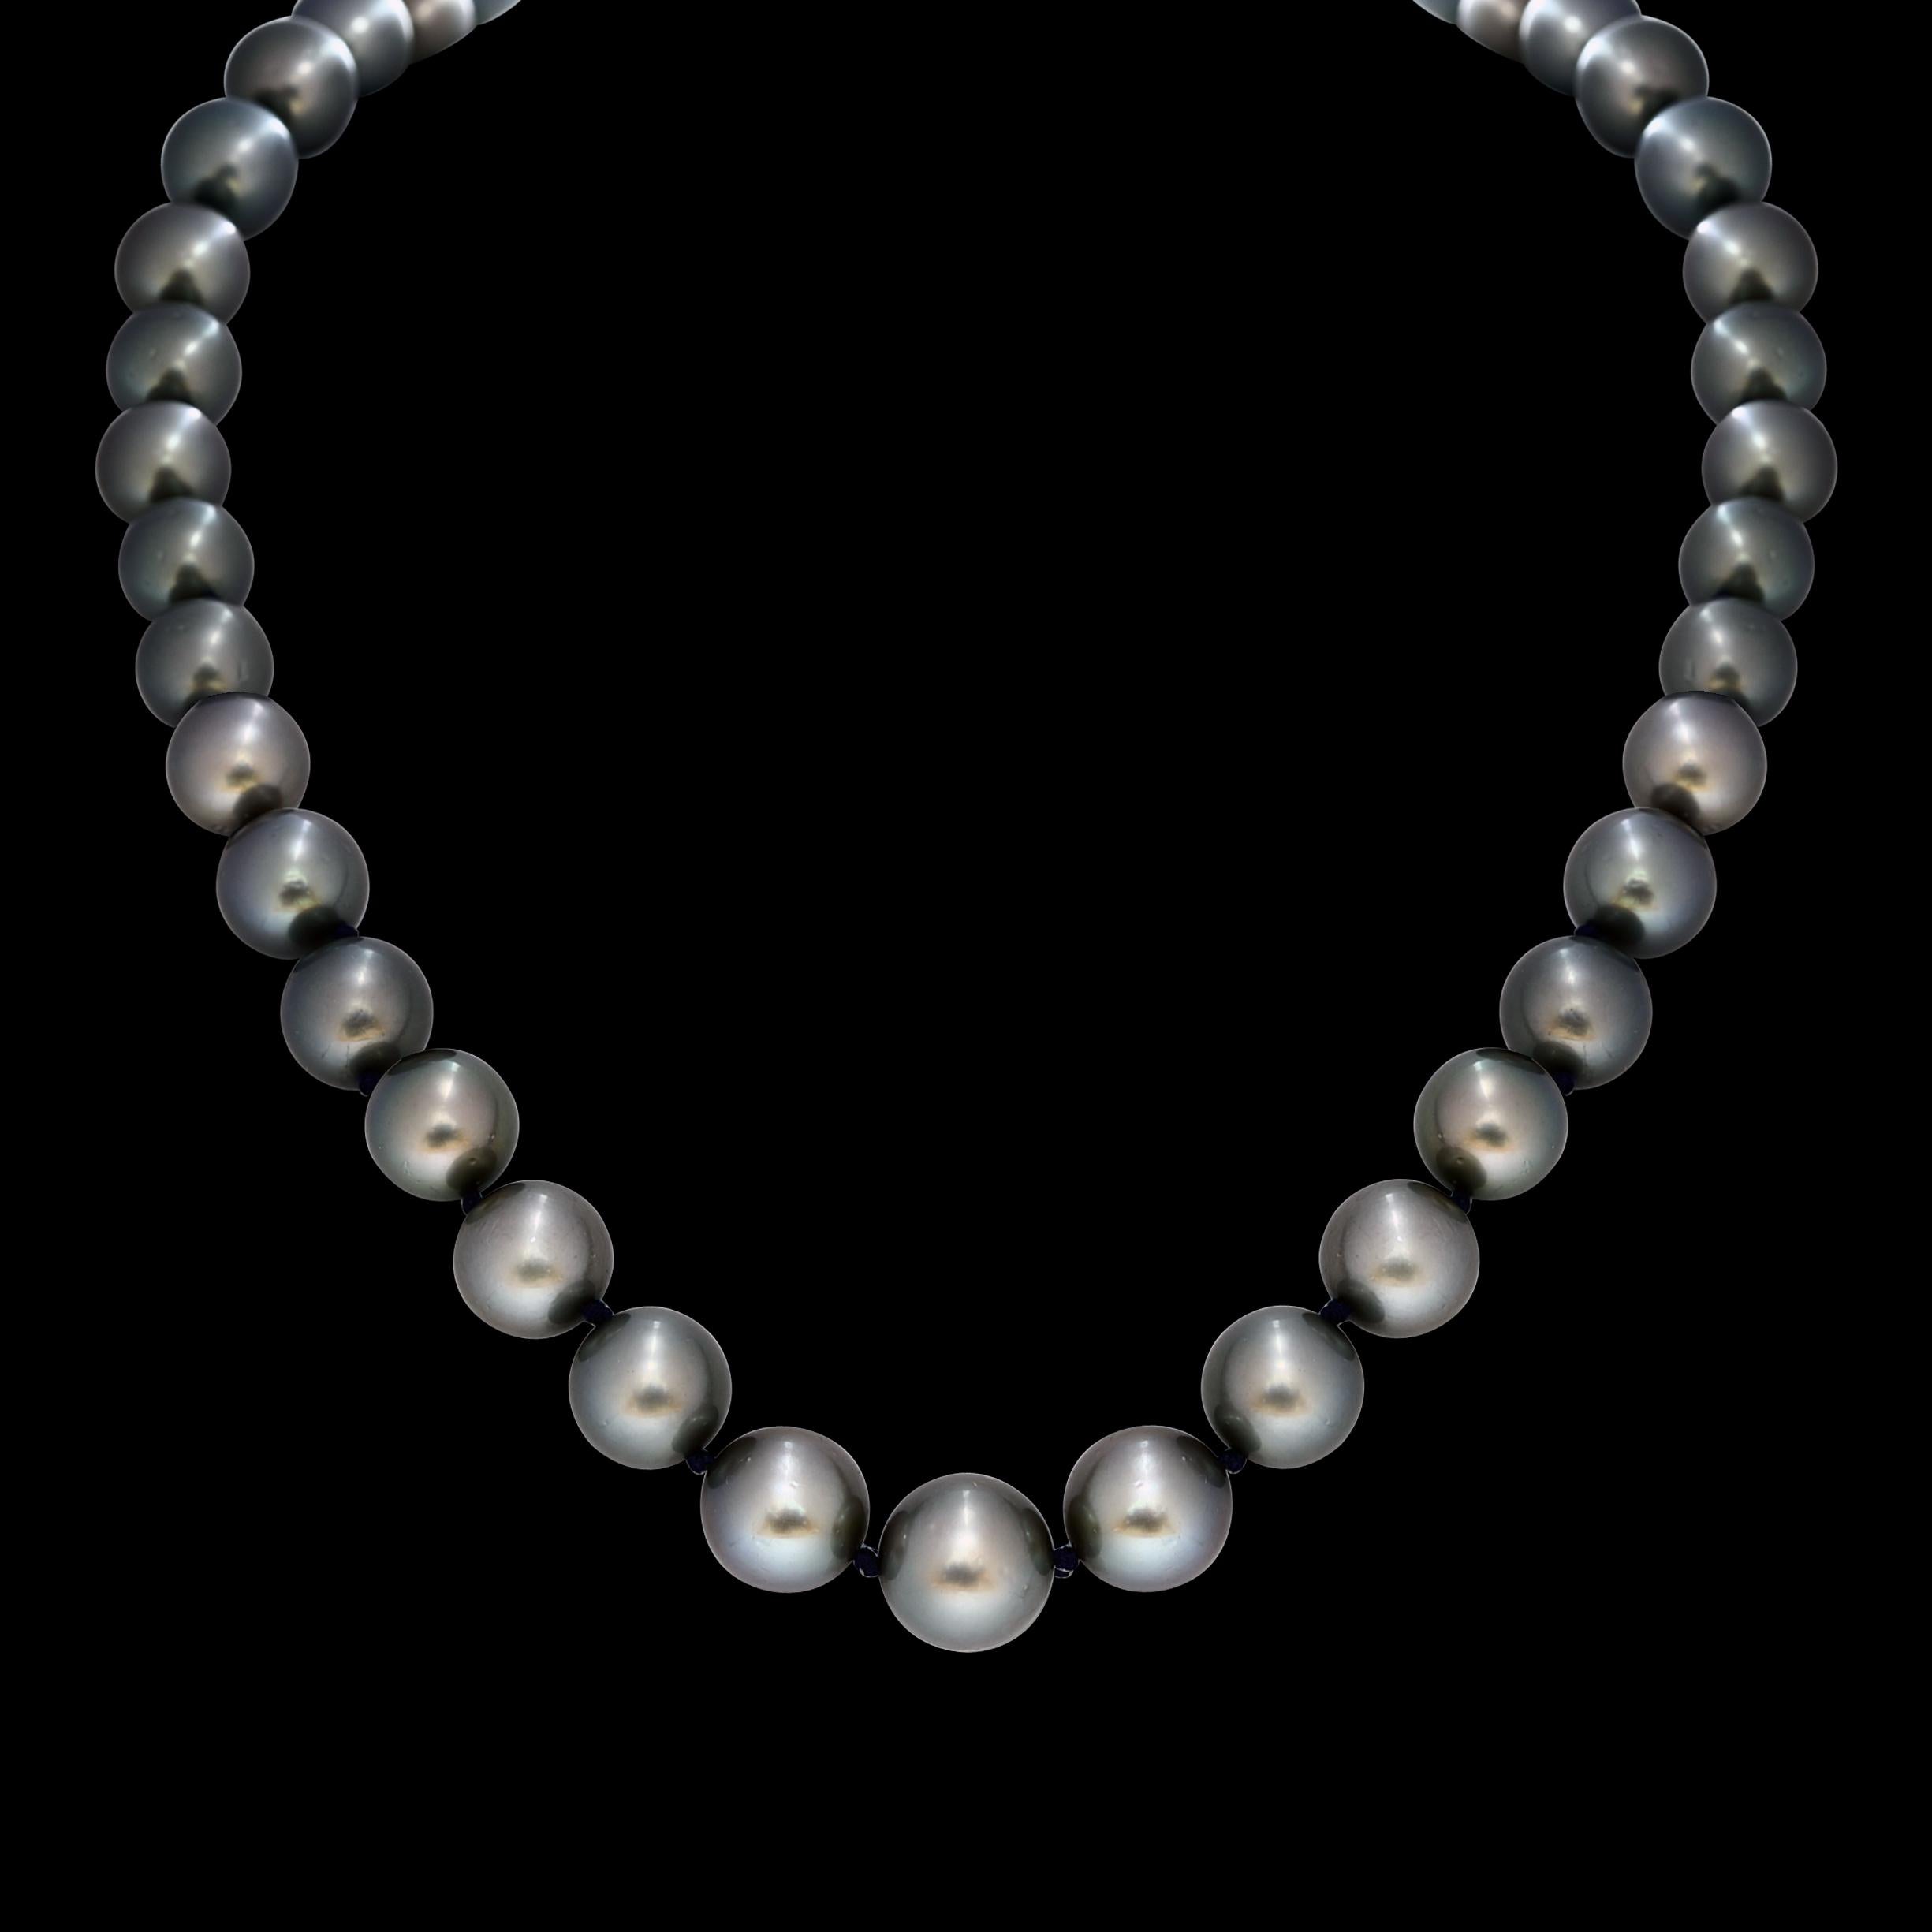 11-15 mm Tahitian Black Graduating Pearls Strand Necklace, Estate, WG For Sale 9